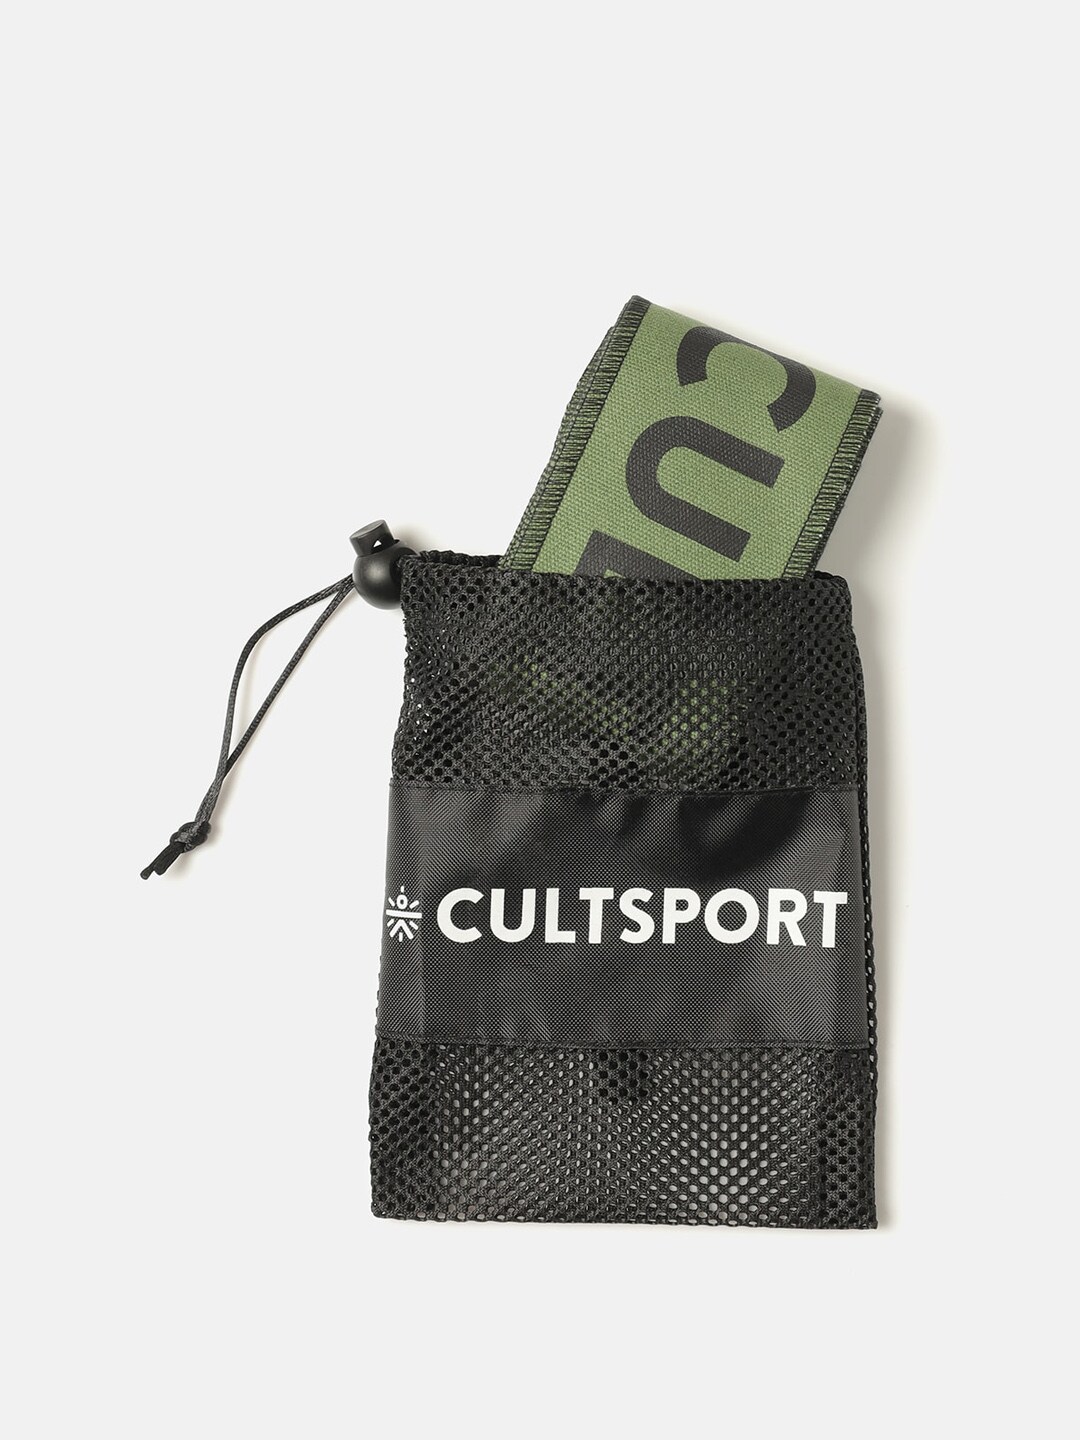 Cultsport Green Wrist Protection Wrist Wrap Price in India